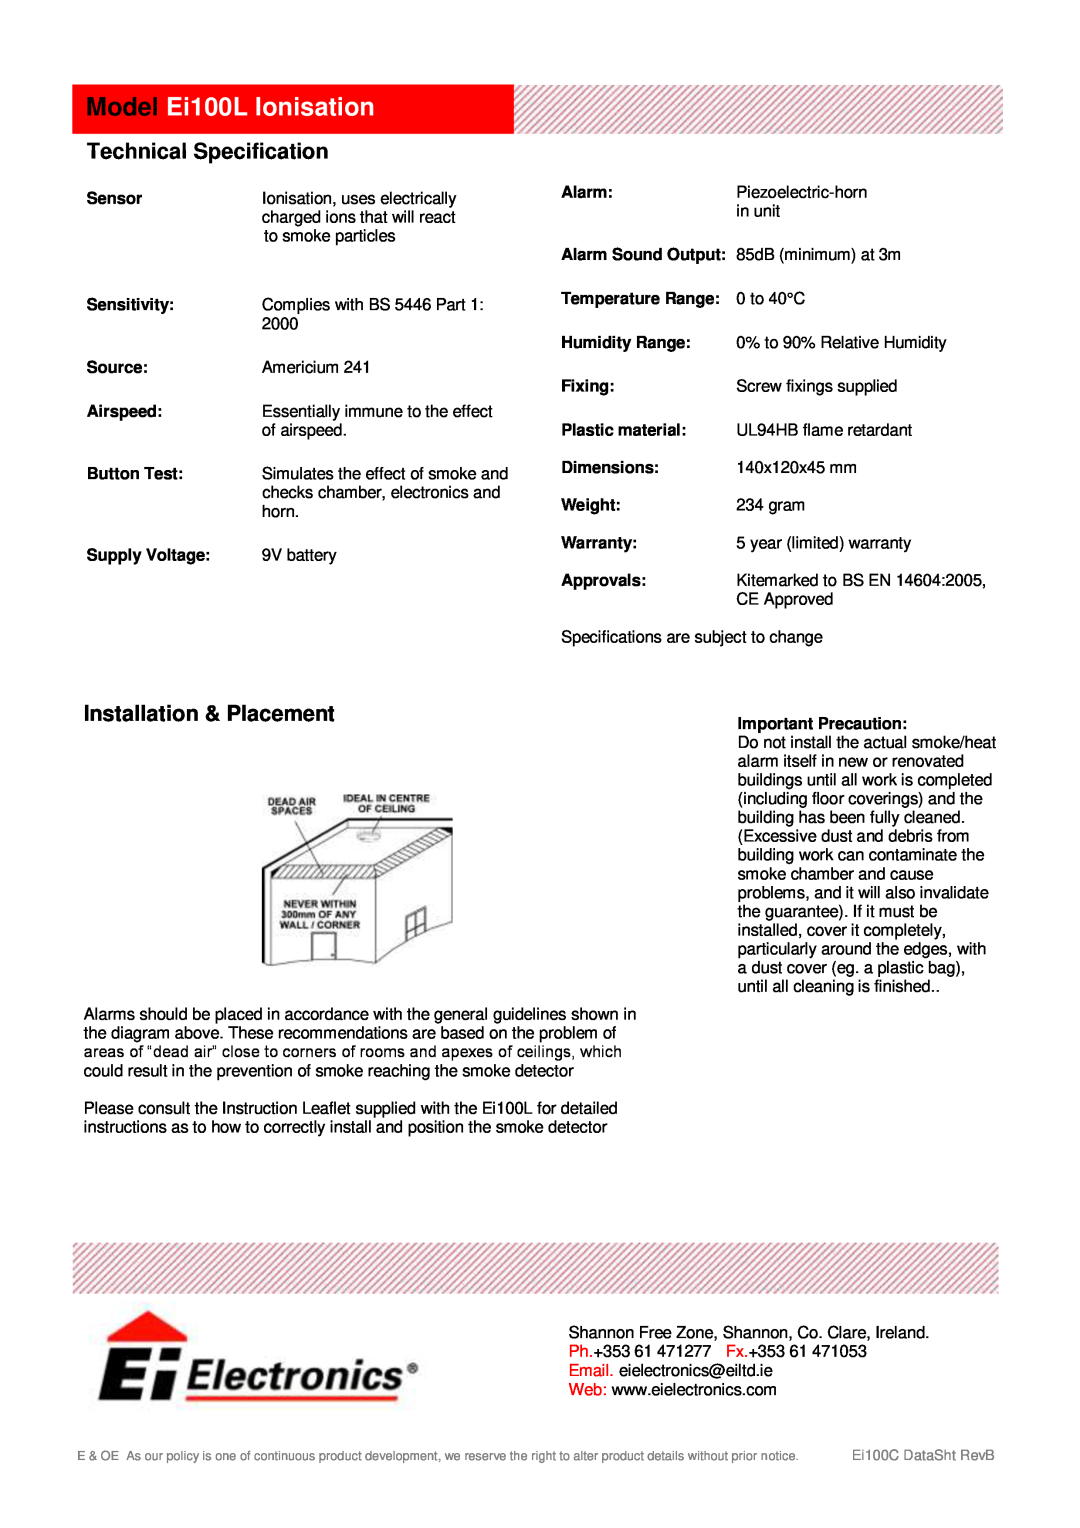 Ei Electronics manual Model Ei100L Ionisation, Technical Specification, Installation & Placement 